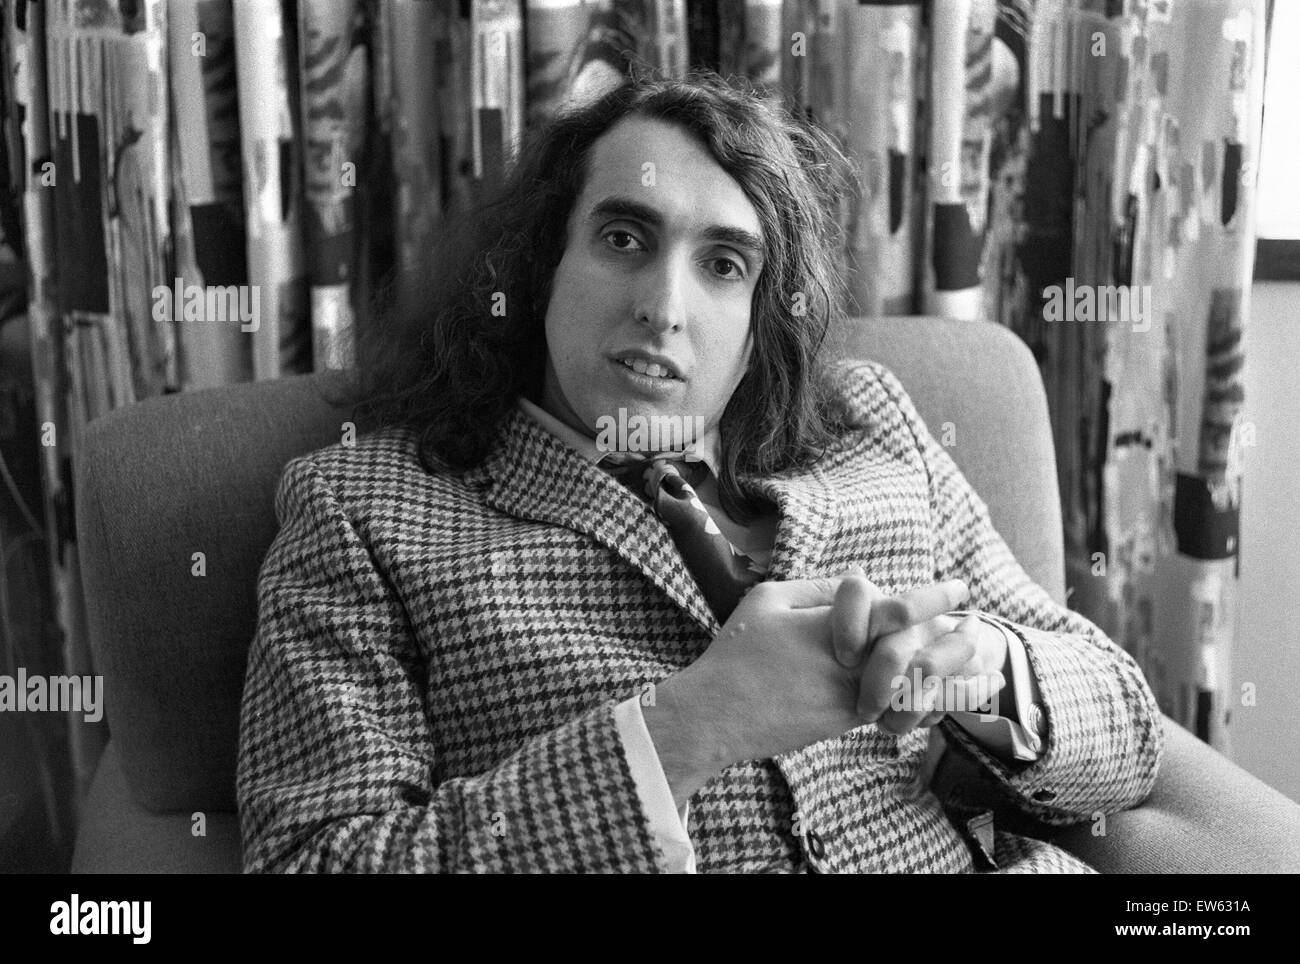 Tiny Tim (born Herbert Khaury; April 12, 1932 - November 30, 1996) was an American singer, ukulele player, and musical archivist. He was most famous for his rendition of "Tiptoe Through the Tulips" sung in a distinctive high falsetto/vibrato voice. (pictu Stock Photo